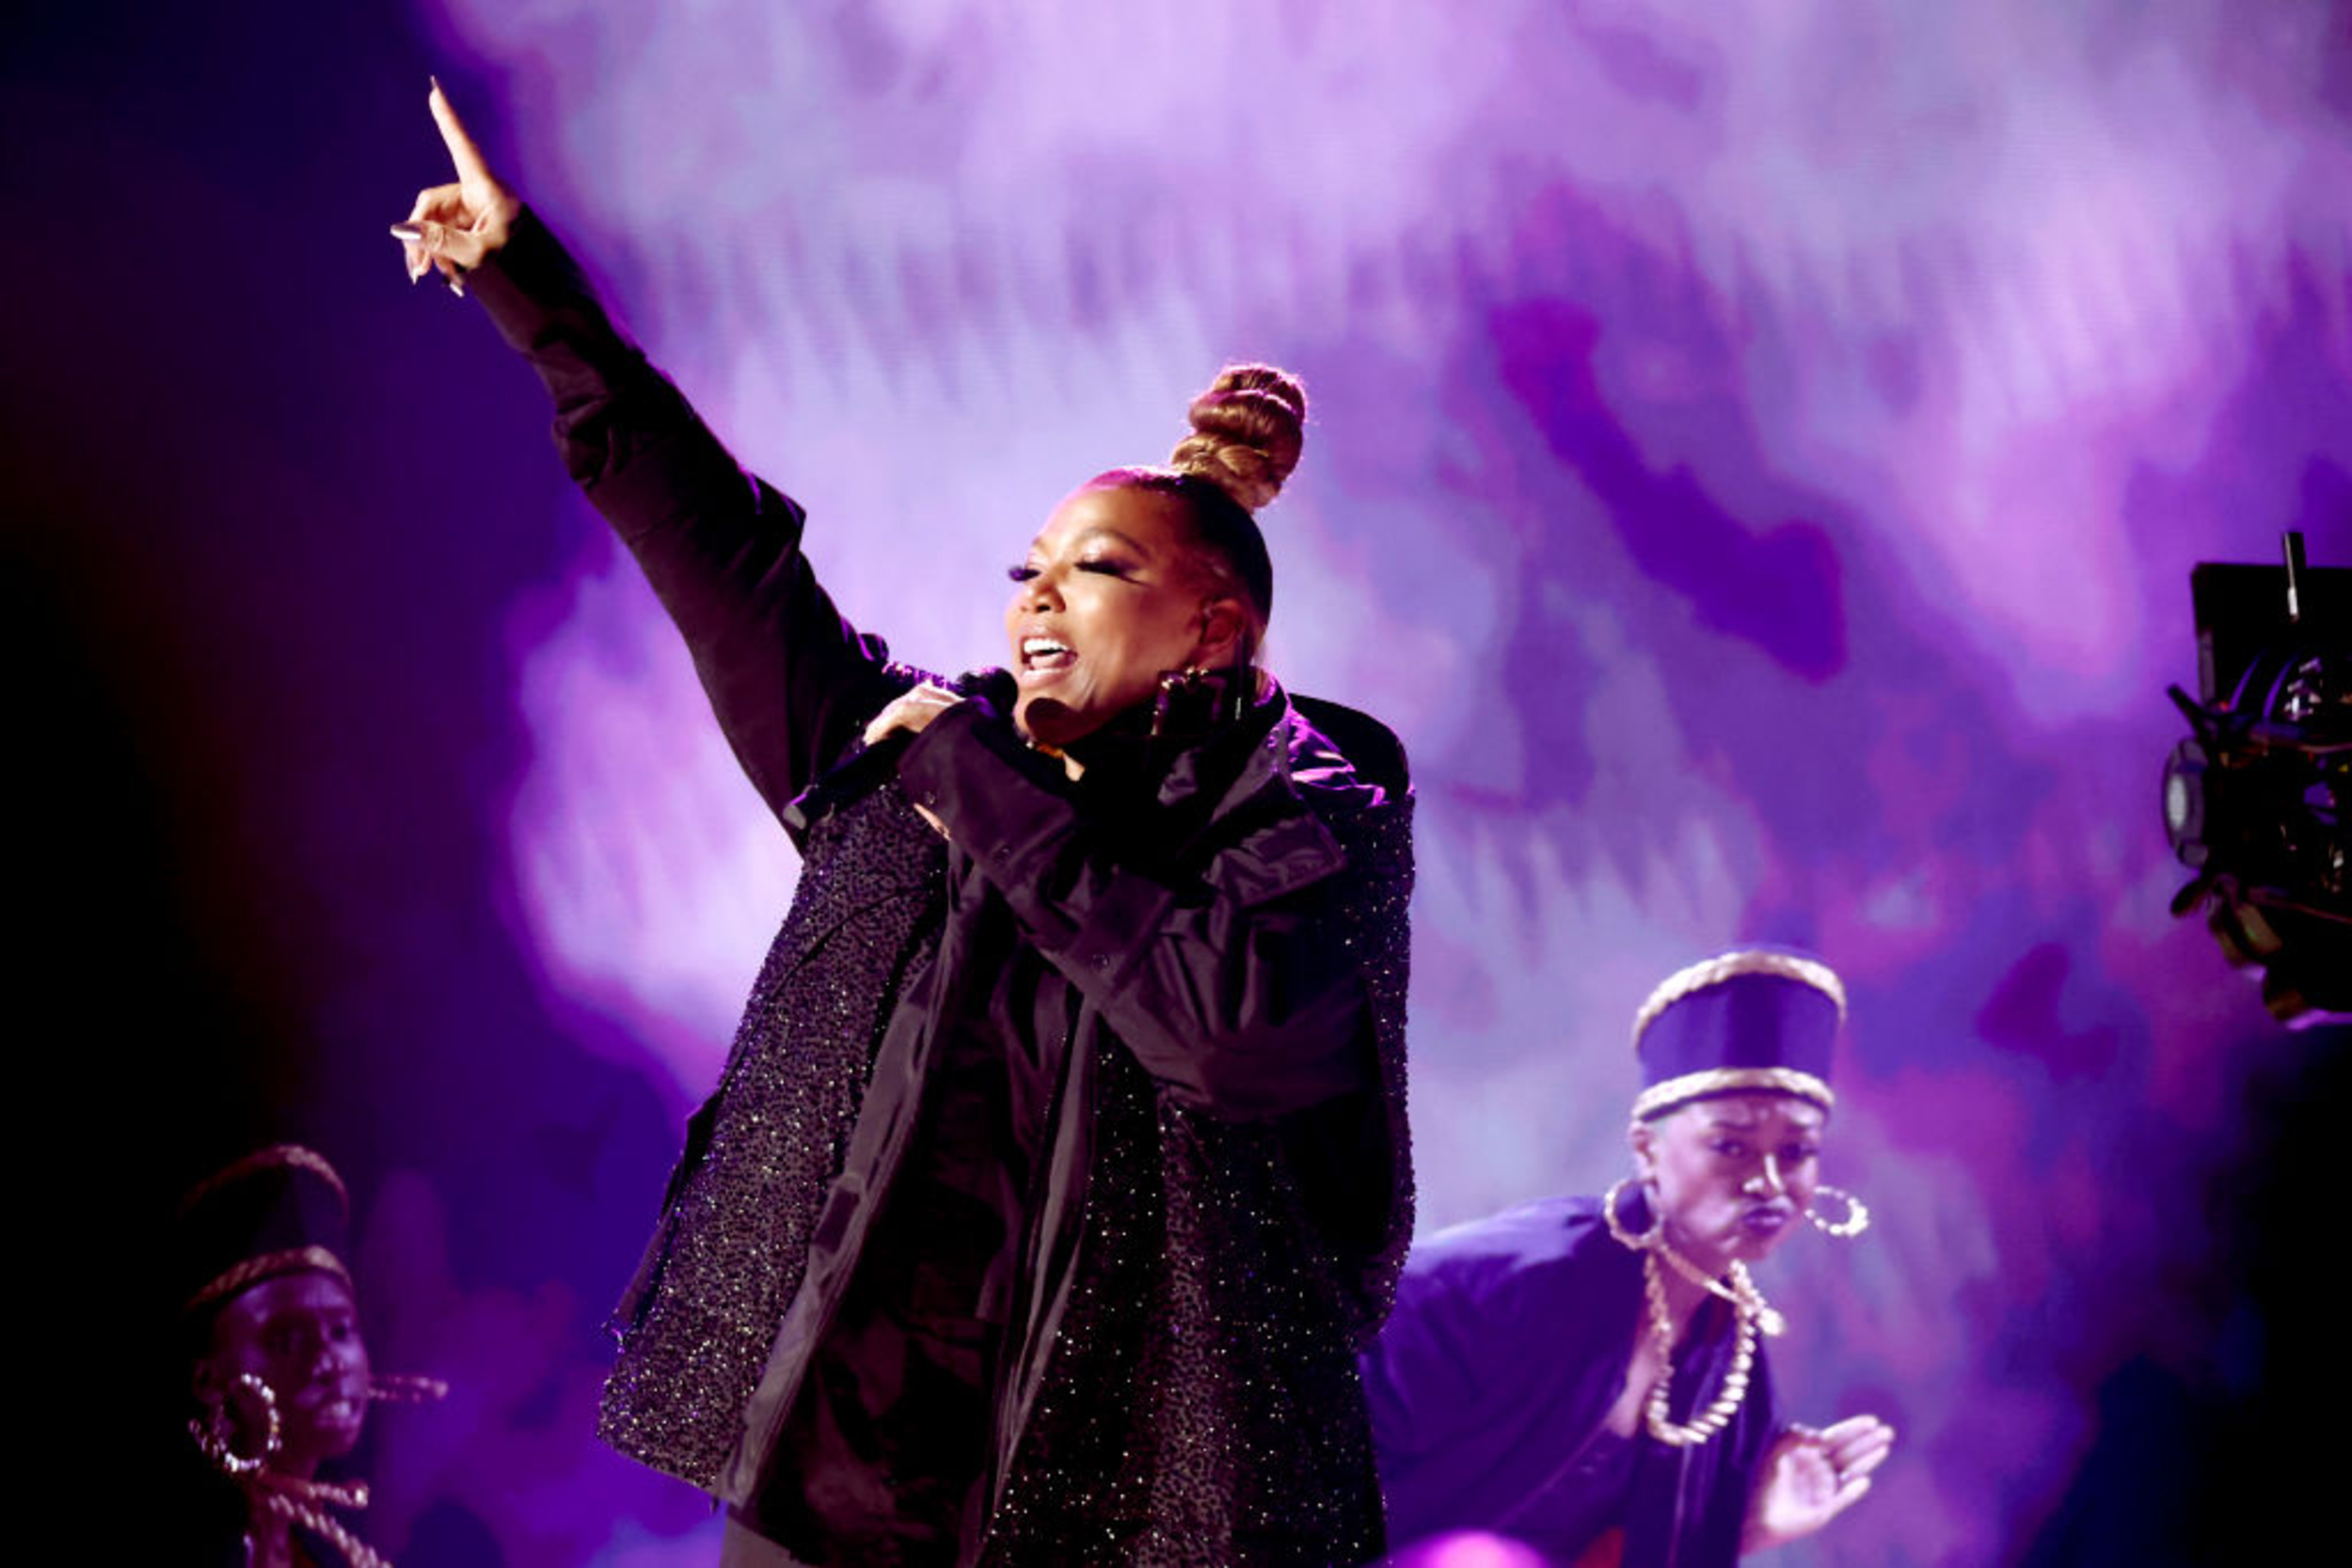 <p>Queen Latifah is one of the earliest female figures in hip-hop. Not only did she advocate for other female artists, but she also used her music to be a voice for the voiceless and call out issues that were affecting the lives of women. Her Grammy Award-winning single <a href="https://www.youtube.com/watch?v=f8cHxydDb7o" rel="noopener noreferrer">“U.N.I.T.Y.”</a> called out misogyny, abuse, and domestic violence against women. She also teamed up with fellow rapper Monie Love on the street feminist anthem “Ladies First.” Not only did Latifah show that female rappers can run with men, but she also was a dominant voice who advocated for change and respect. </p><p><a href='https://www.msn.com/en-us/community/channel/vid-cj9pqbr0vn9in2b6ddcd8sfgpfq6x6utp44fssrv6mc2gtybw0us'>Follow us on MSN to see more of our exclusive entertainment content.</a></p>